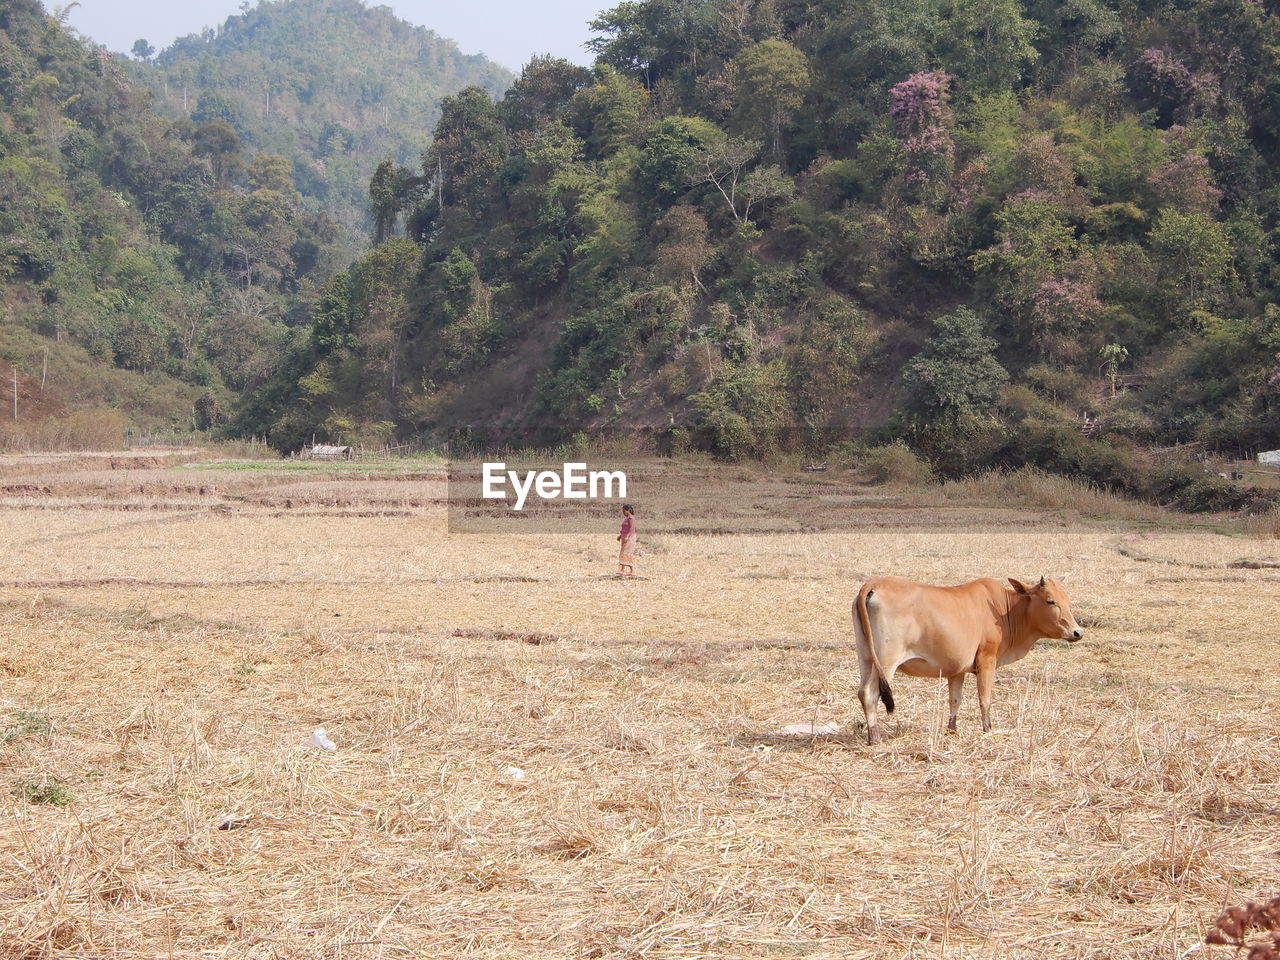 View of cattle on a field in southern laos.